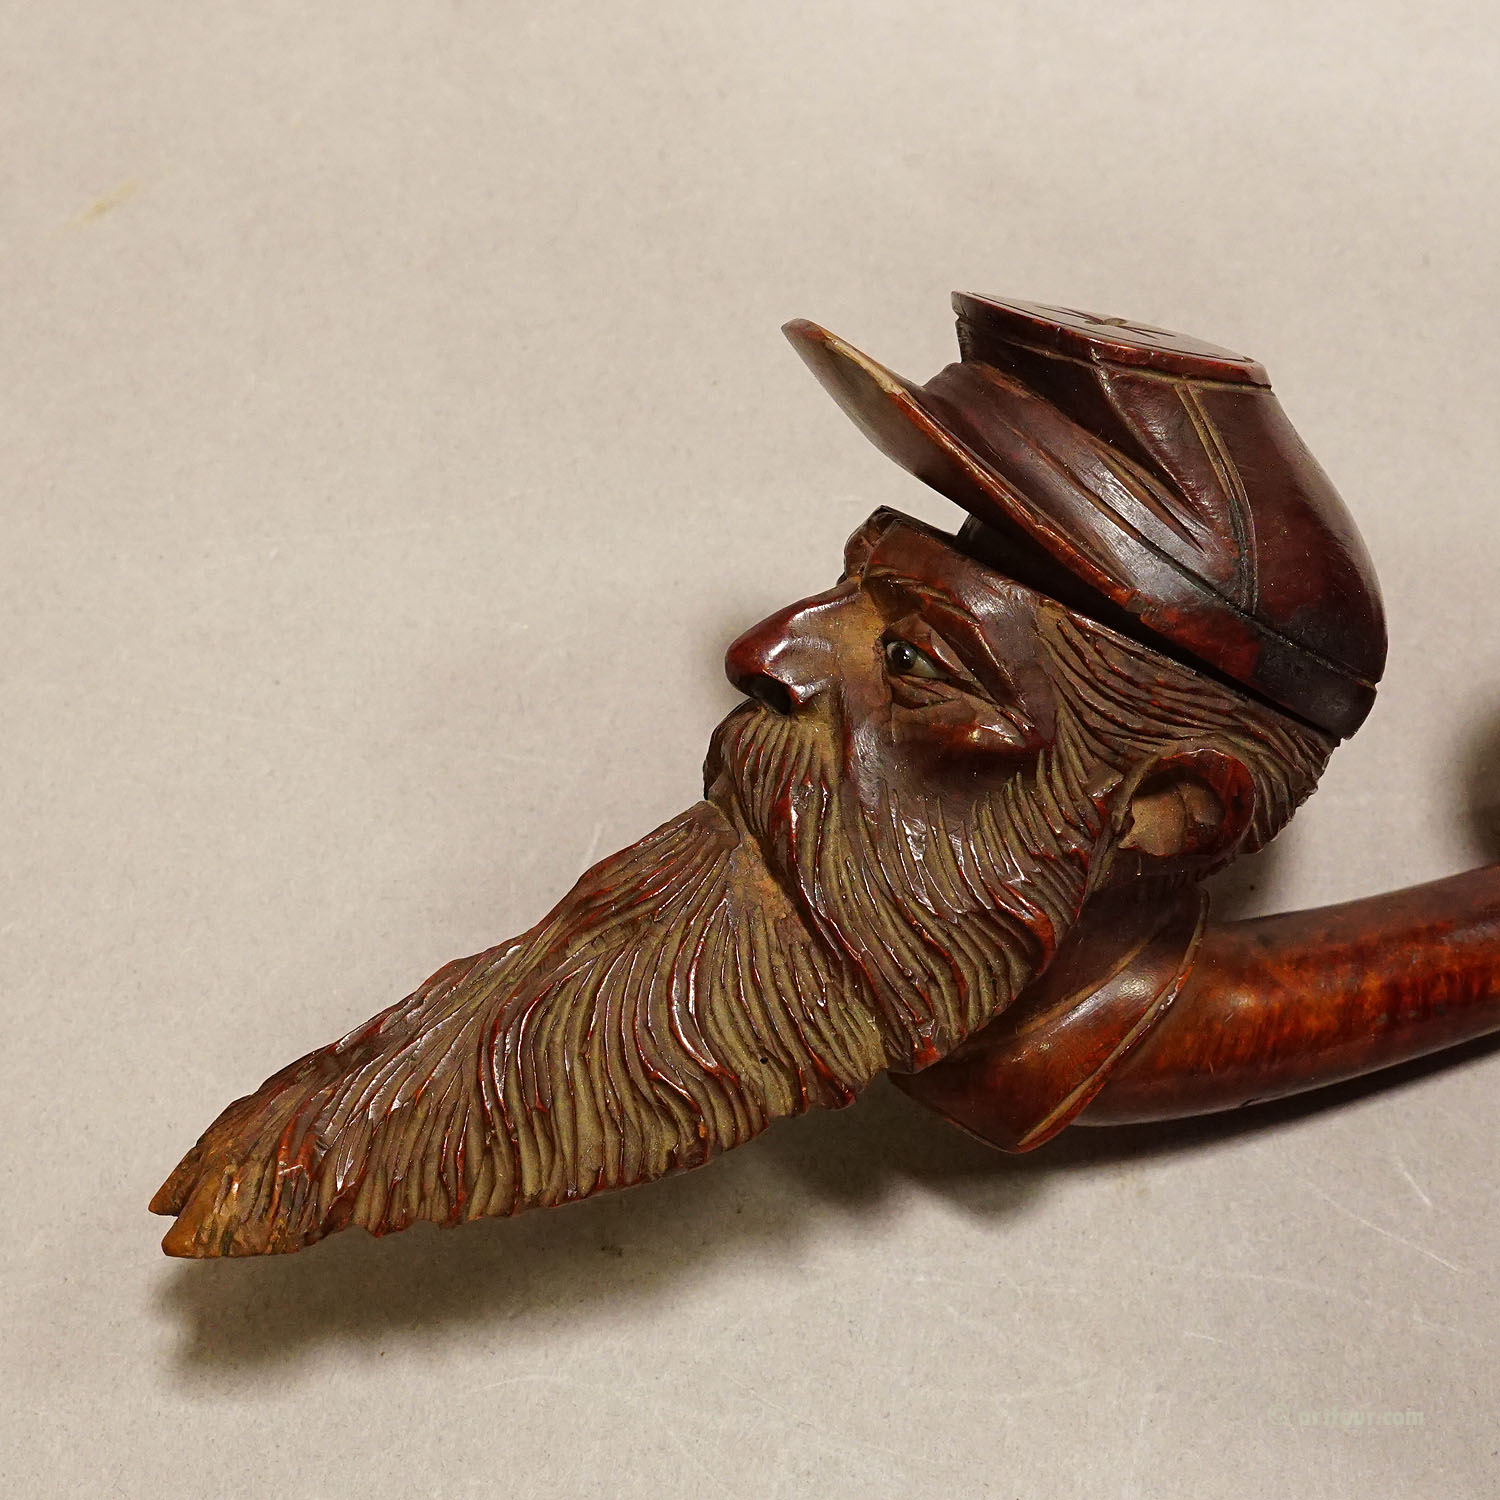 Antique Carved Wood Tobacco Pipe with Soldier Head